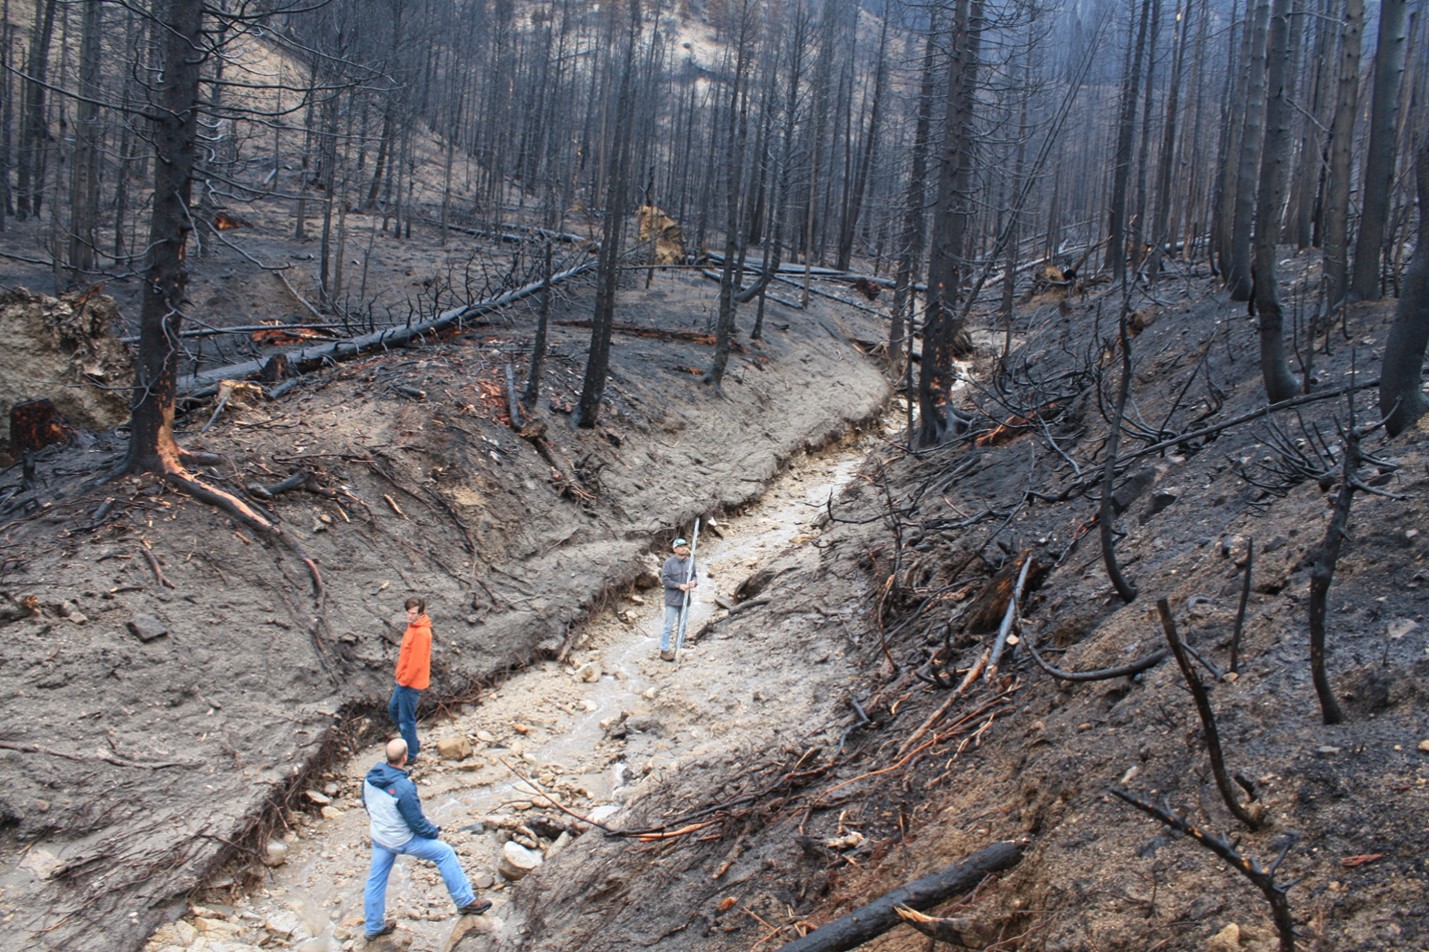 Photo of Geoscience studnets working in a wildfire damaged area.